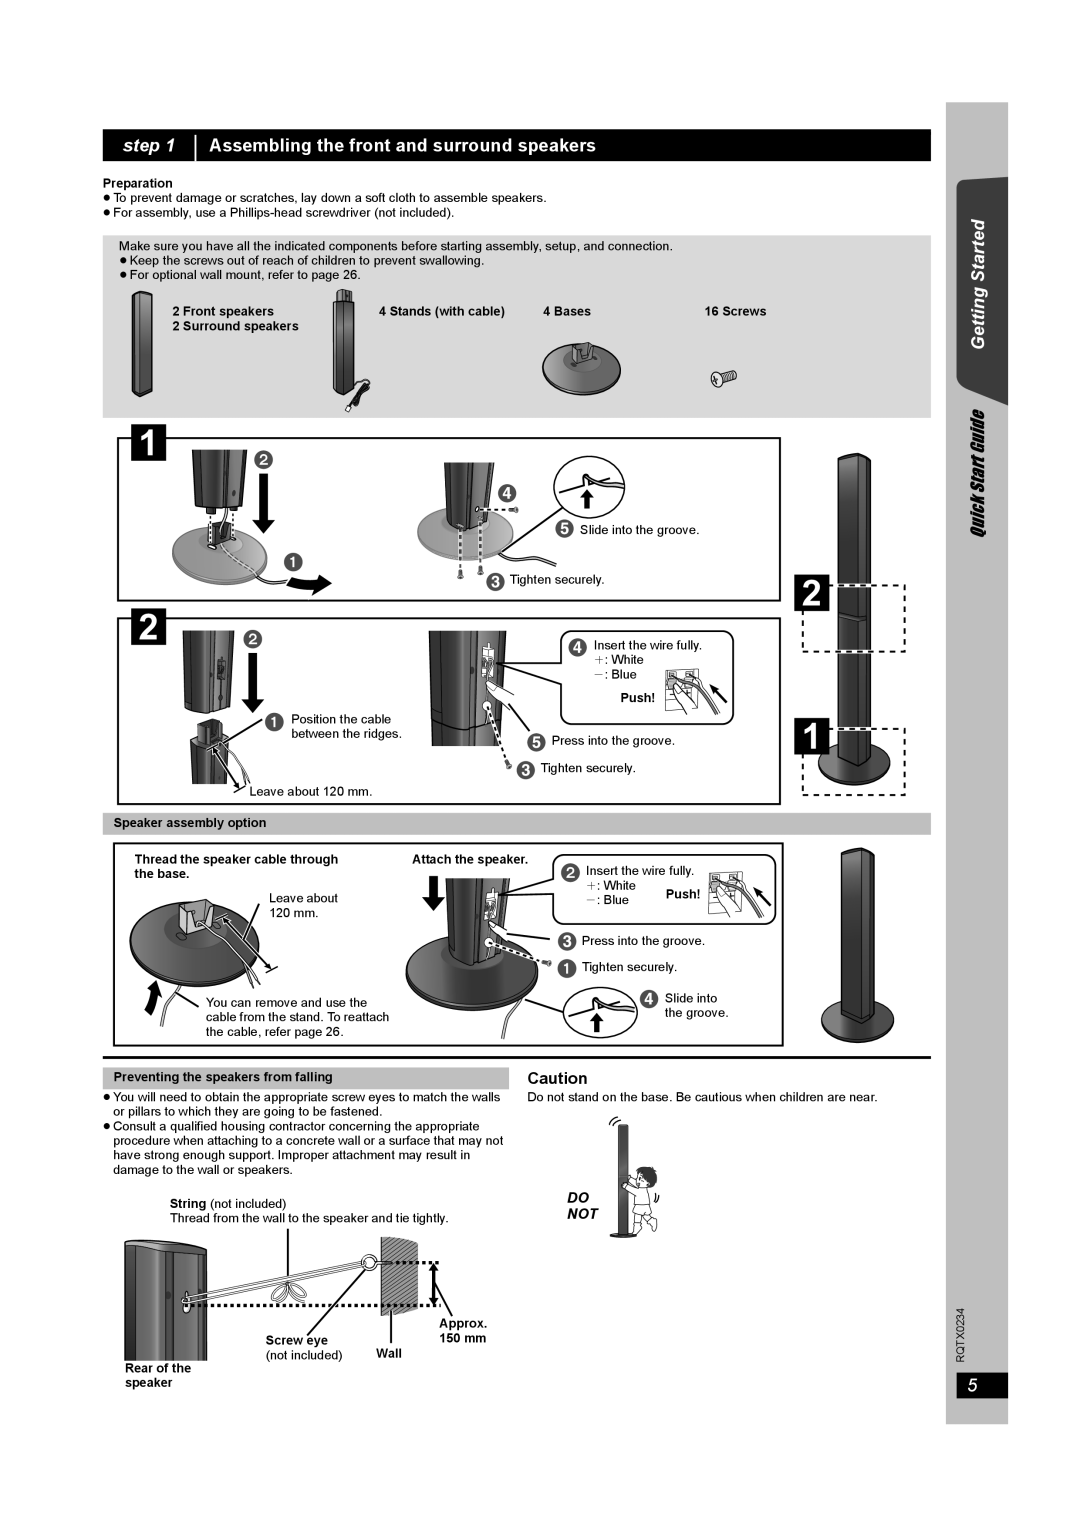 Panasonic SC-PT875 step, Assembling the front and surround speakers, Quick Start Guide Getting Started, Do Not 